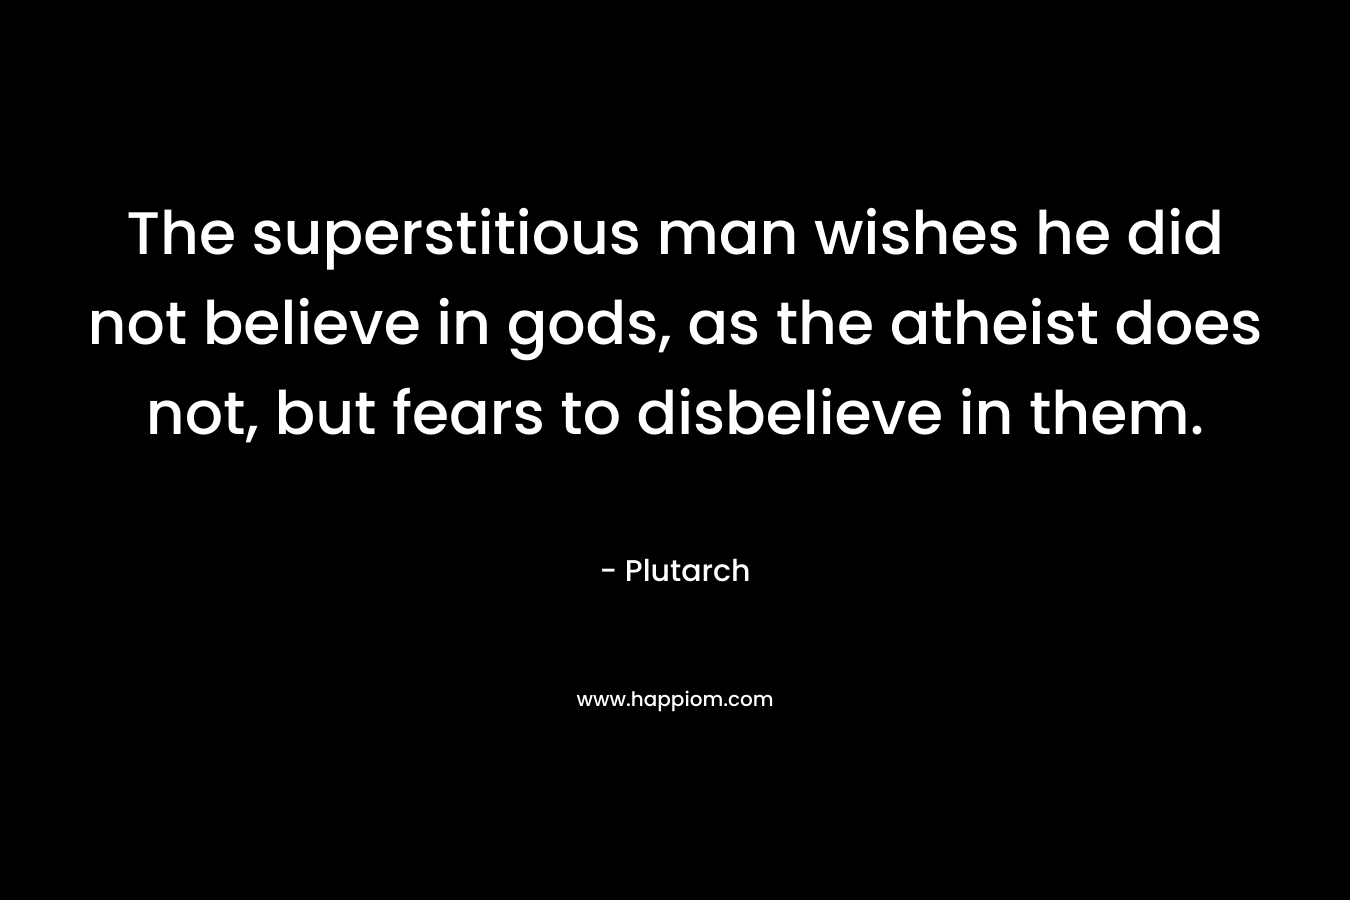 The superstitious man wishes he did not believe in gods, as the atheist does not, but fears to disbelieve in them. – Plutarch